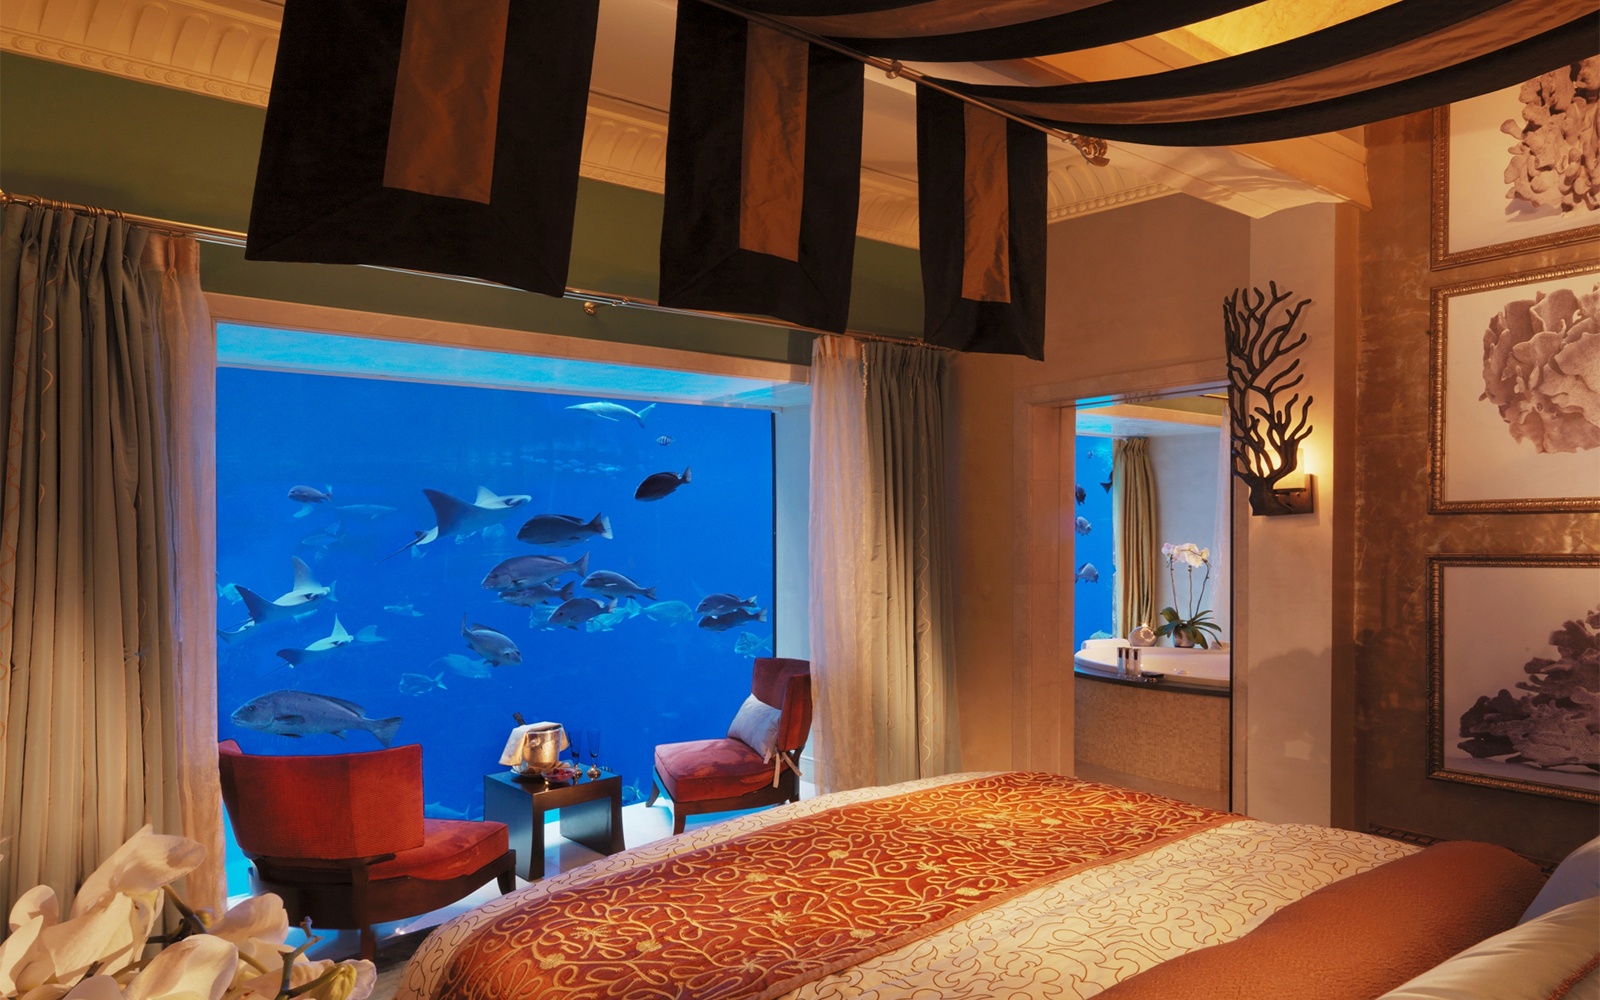 The Suite Life: The $8,167-a-Night Neptune Suite at Atlantis, The Palm